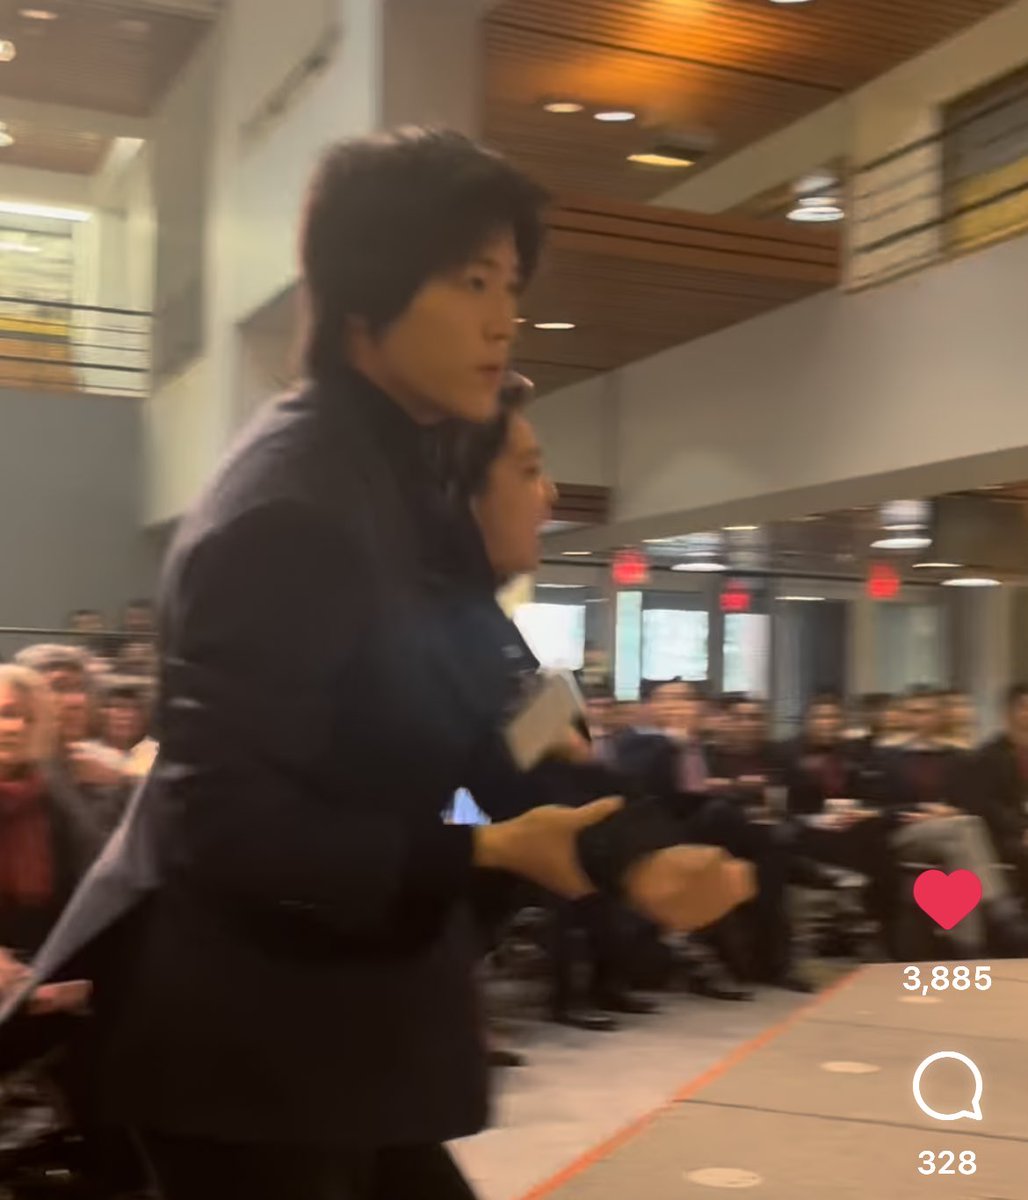 Harvard seems to have allowed a random guy affiliated with the Chinese embassy to drag a Tibetan American student out of a lecture given by the Chinese ambassador. Demented. @SFTHQ